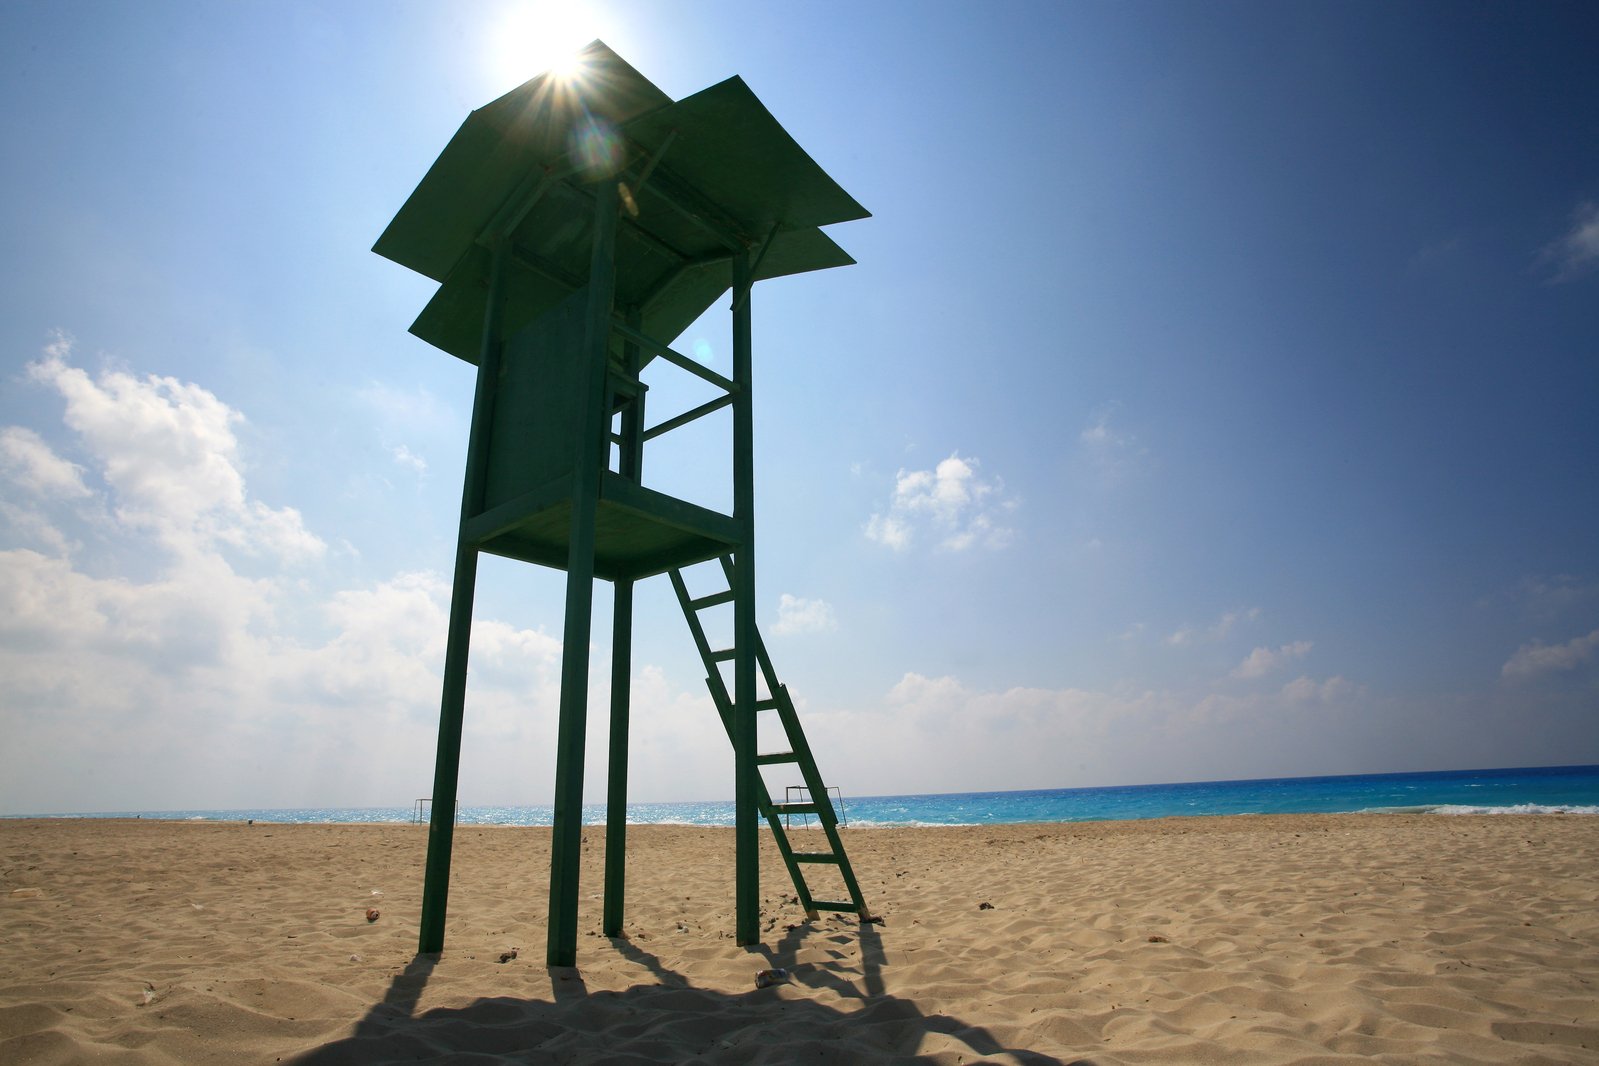 an image of an empty lifeguard station on a beach